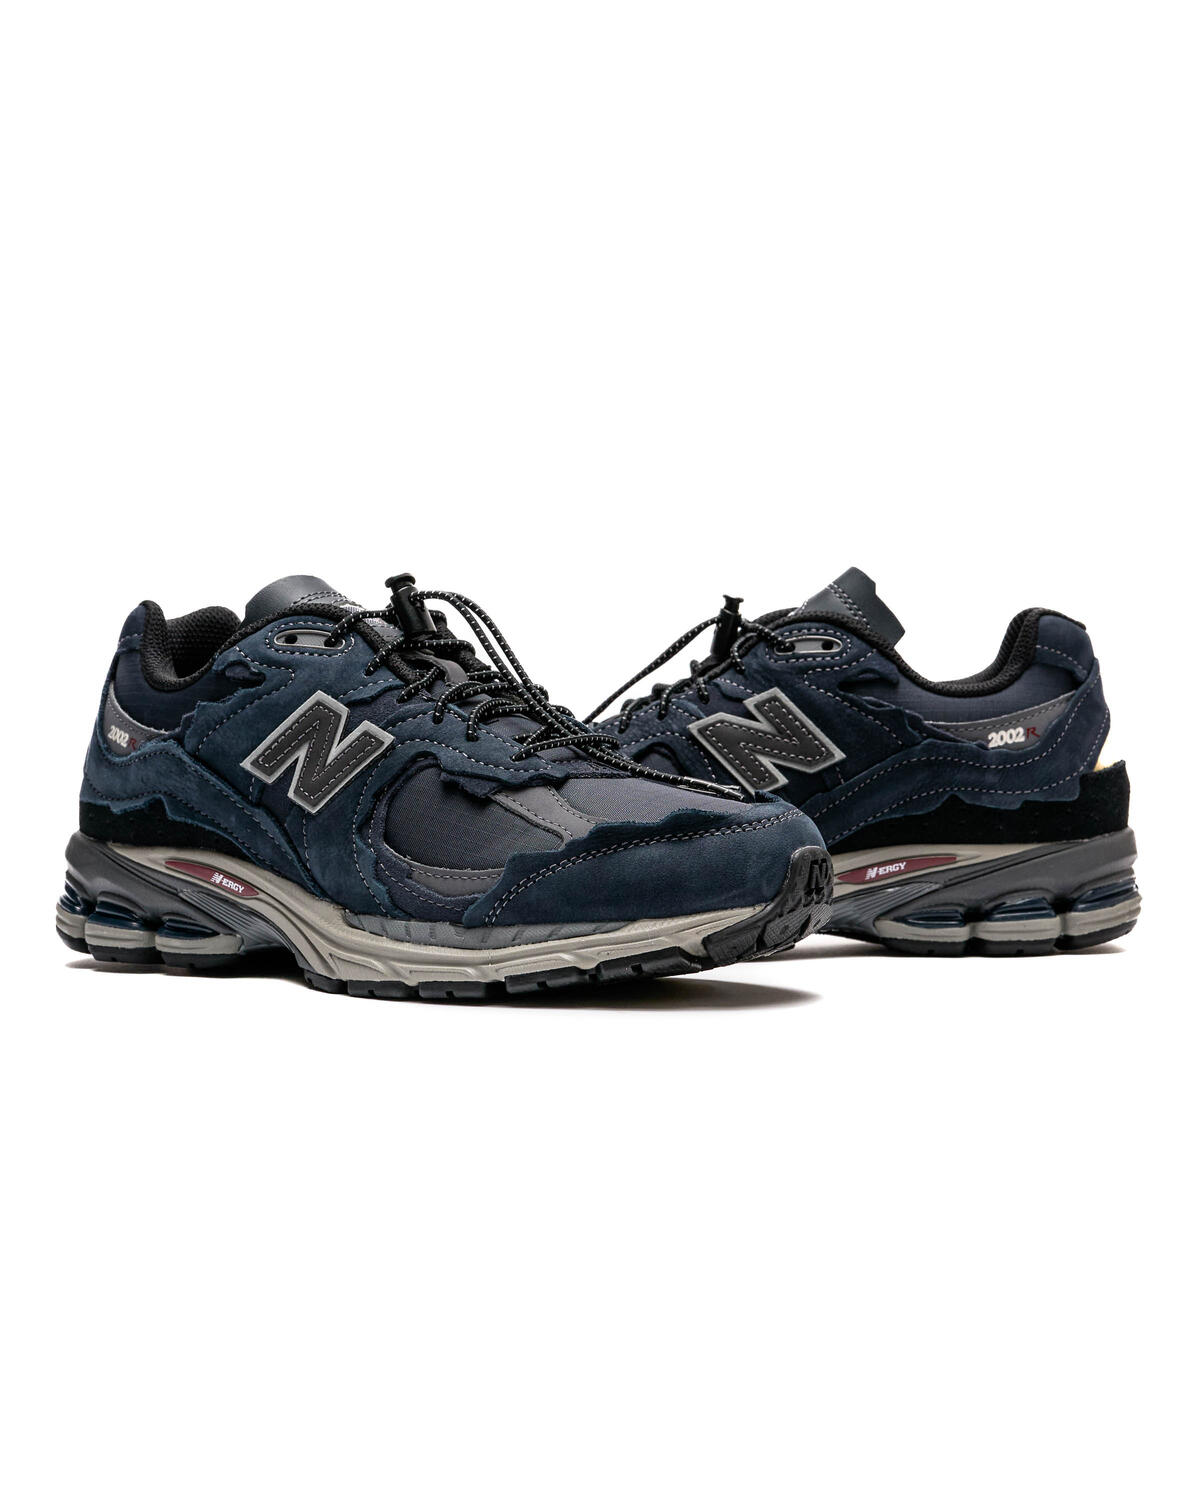 M2002RDO | The New Balance Fresh Foam 880 v12 is one of the | New